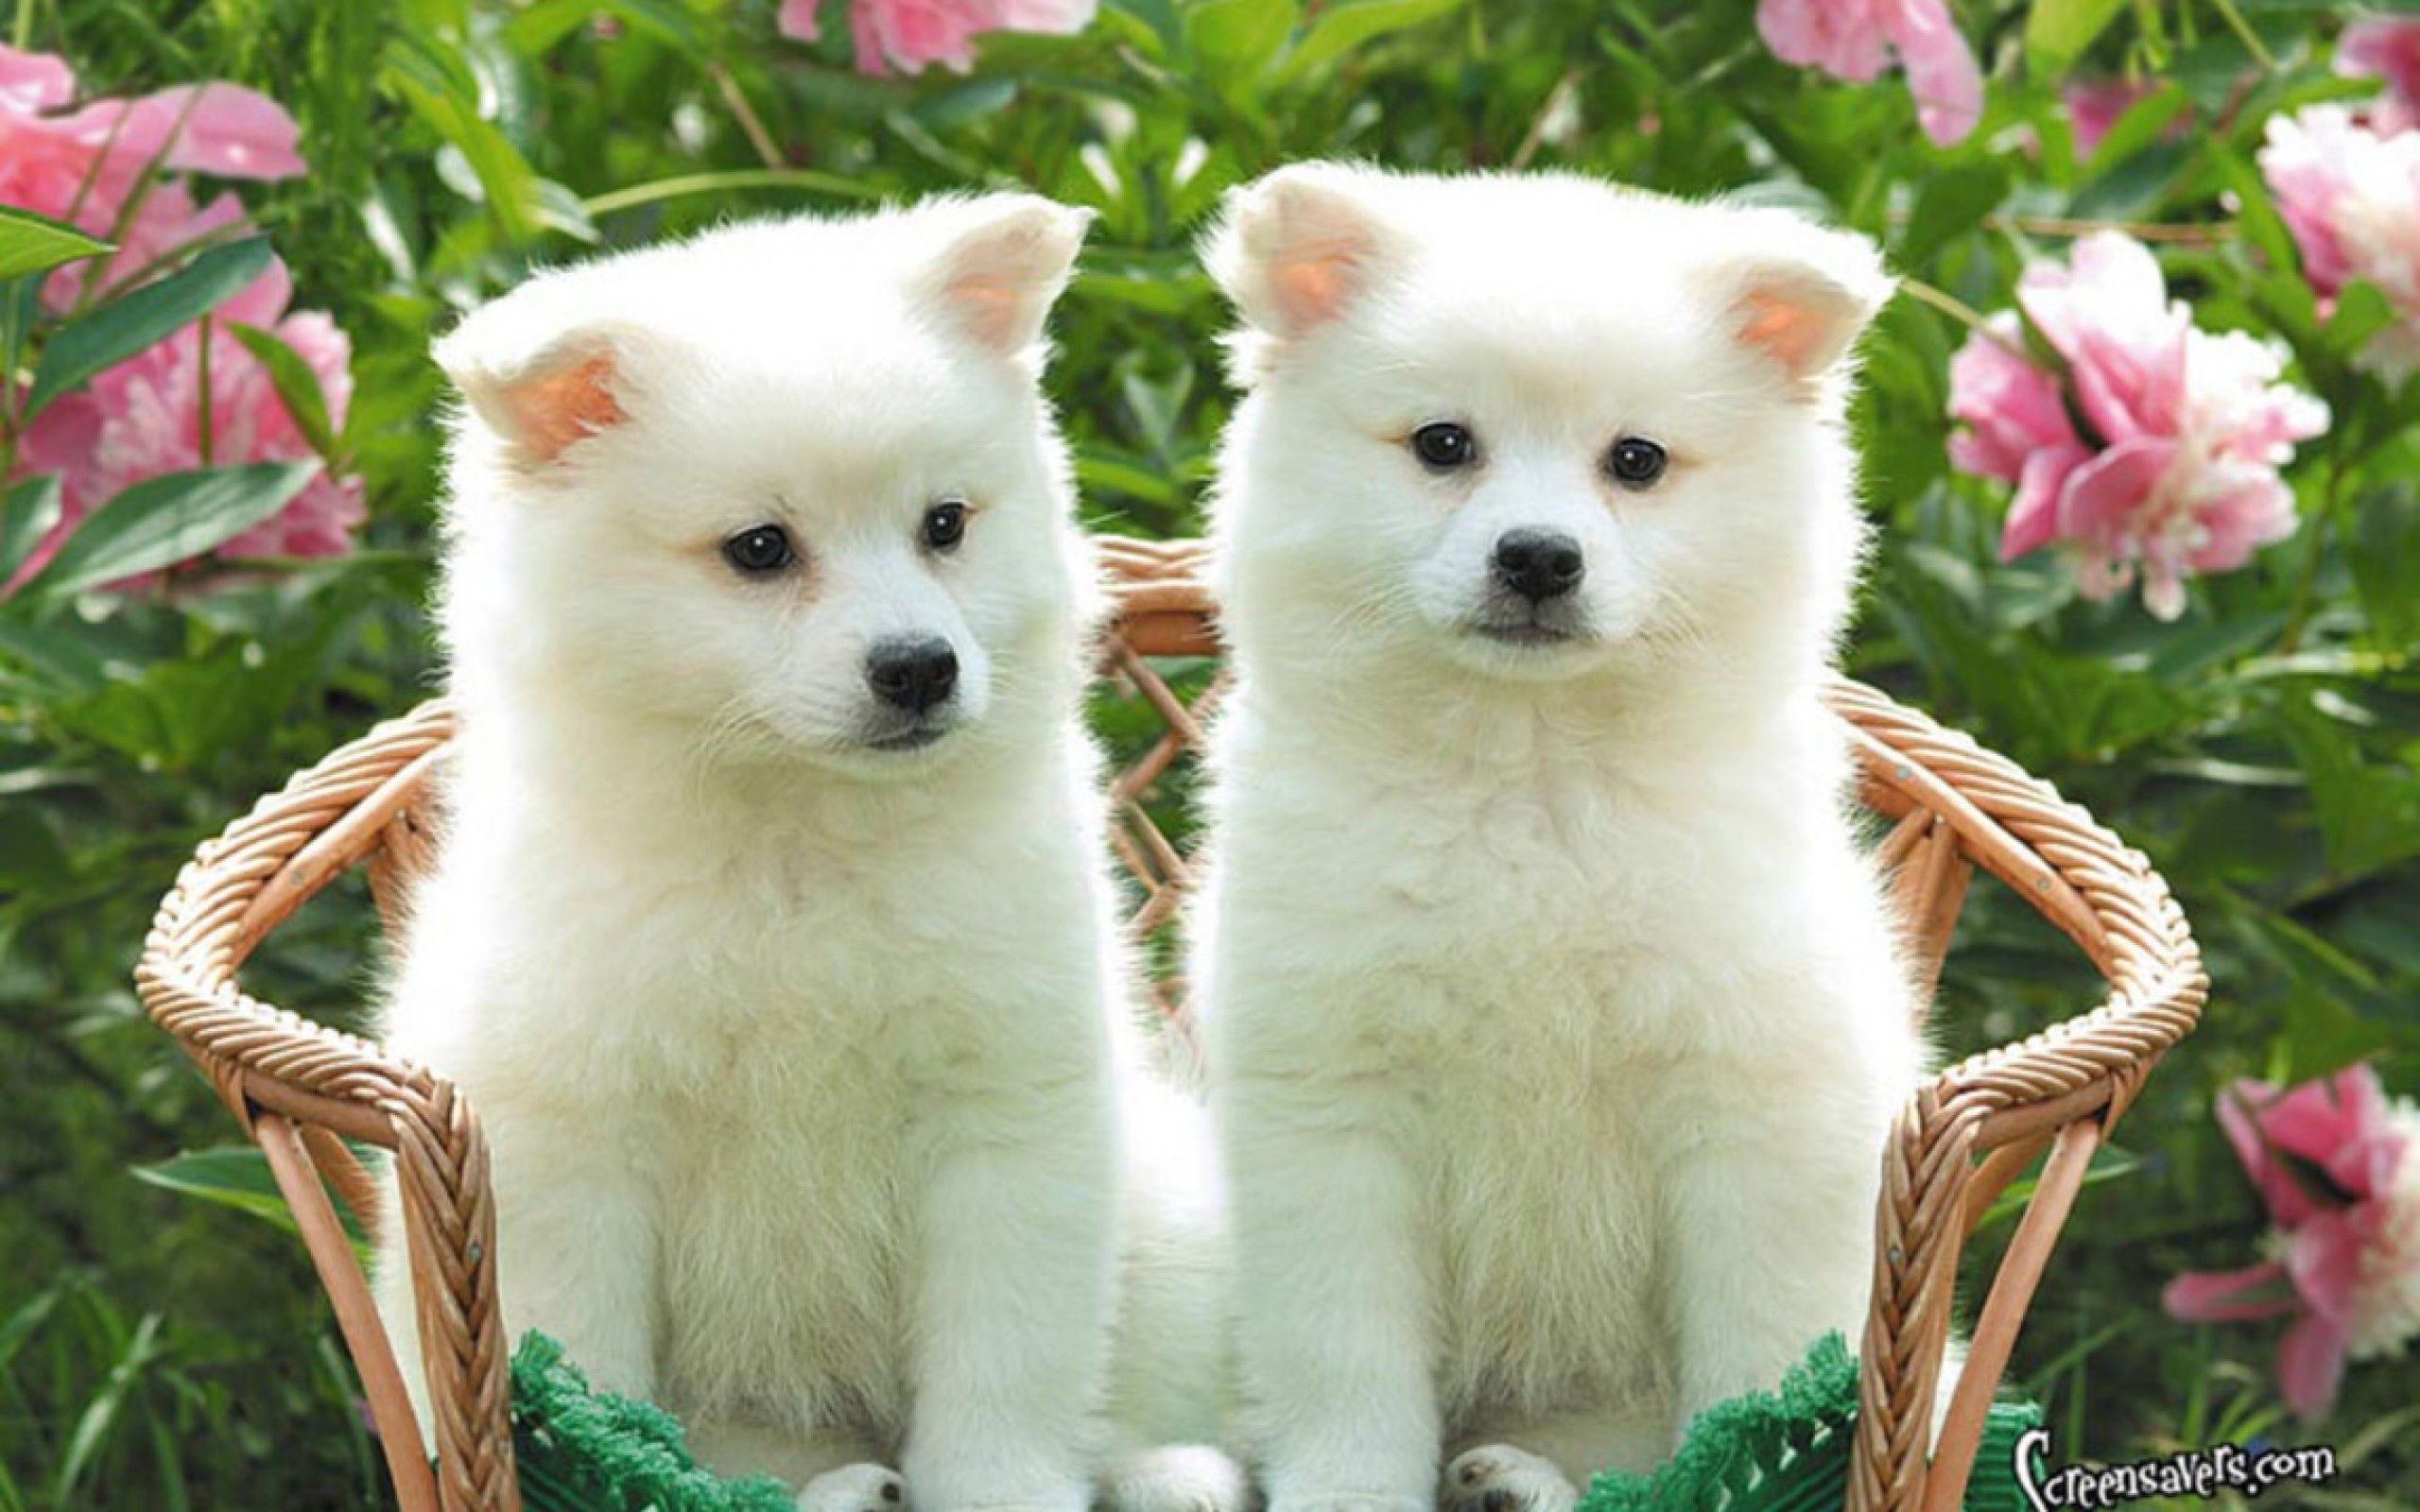 Puppies Together Hd Wallpaper For Desktop And Cute Kittens .